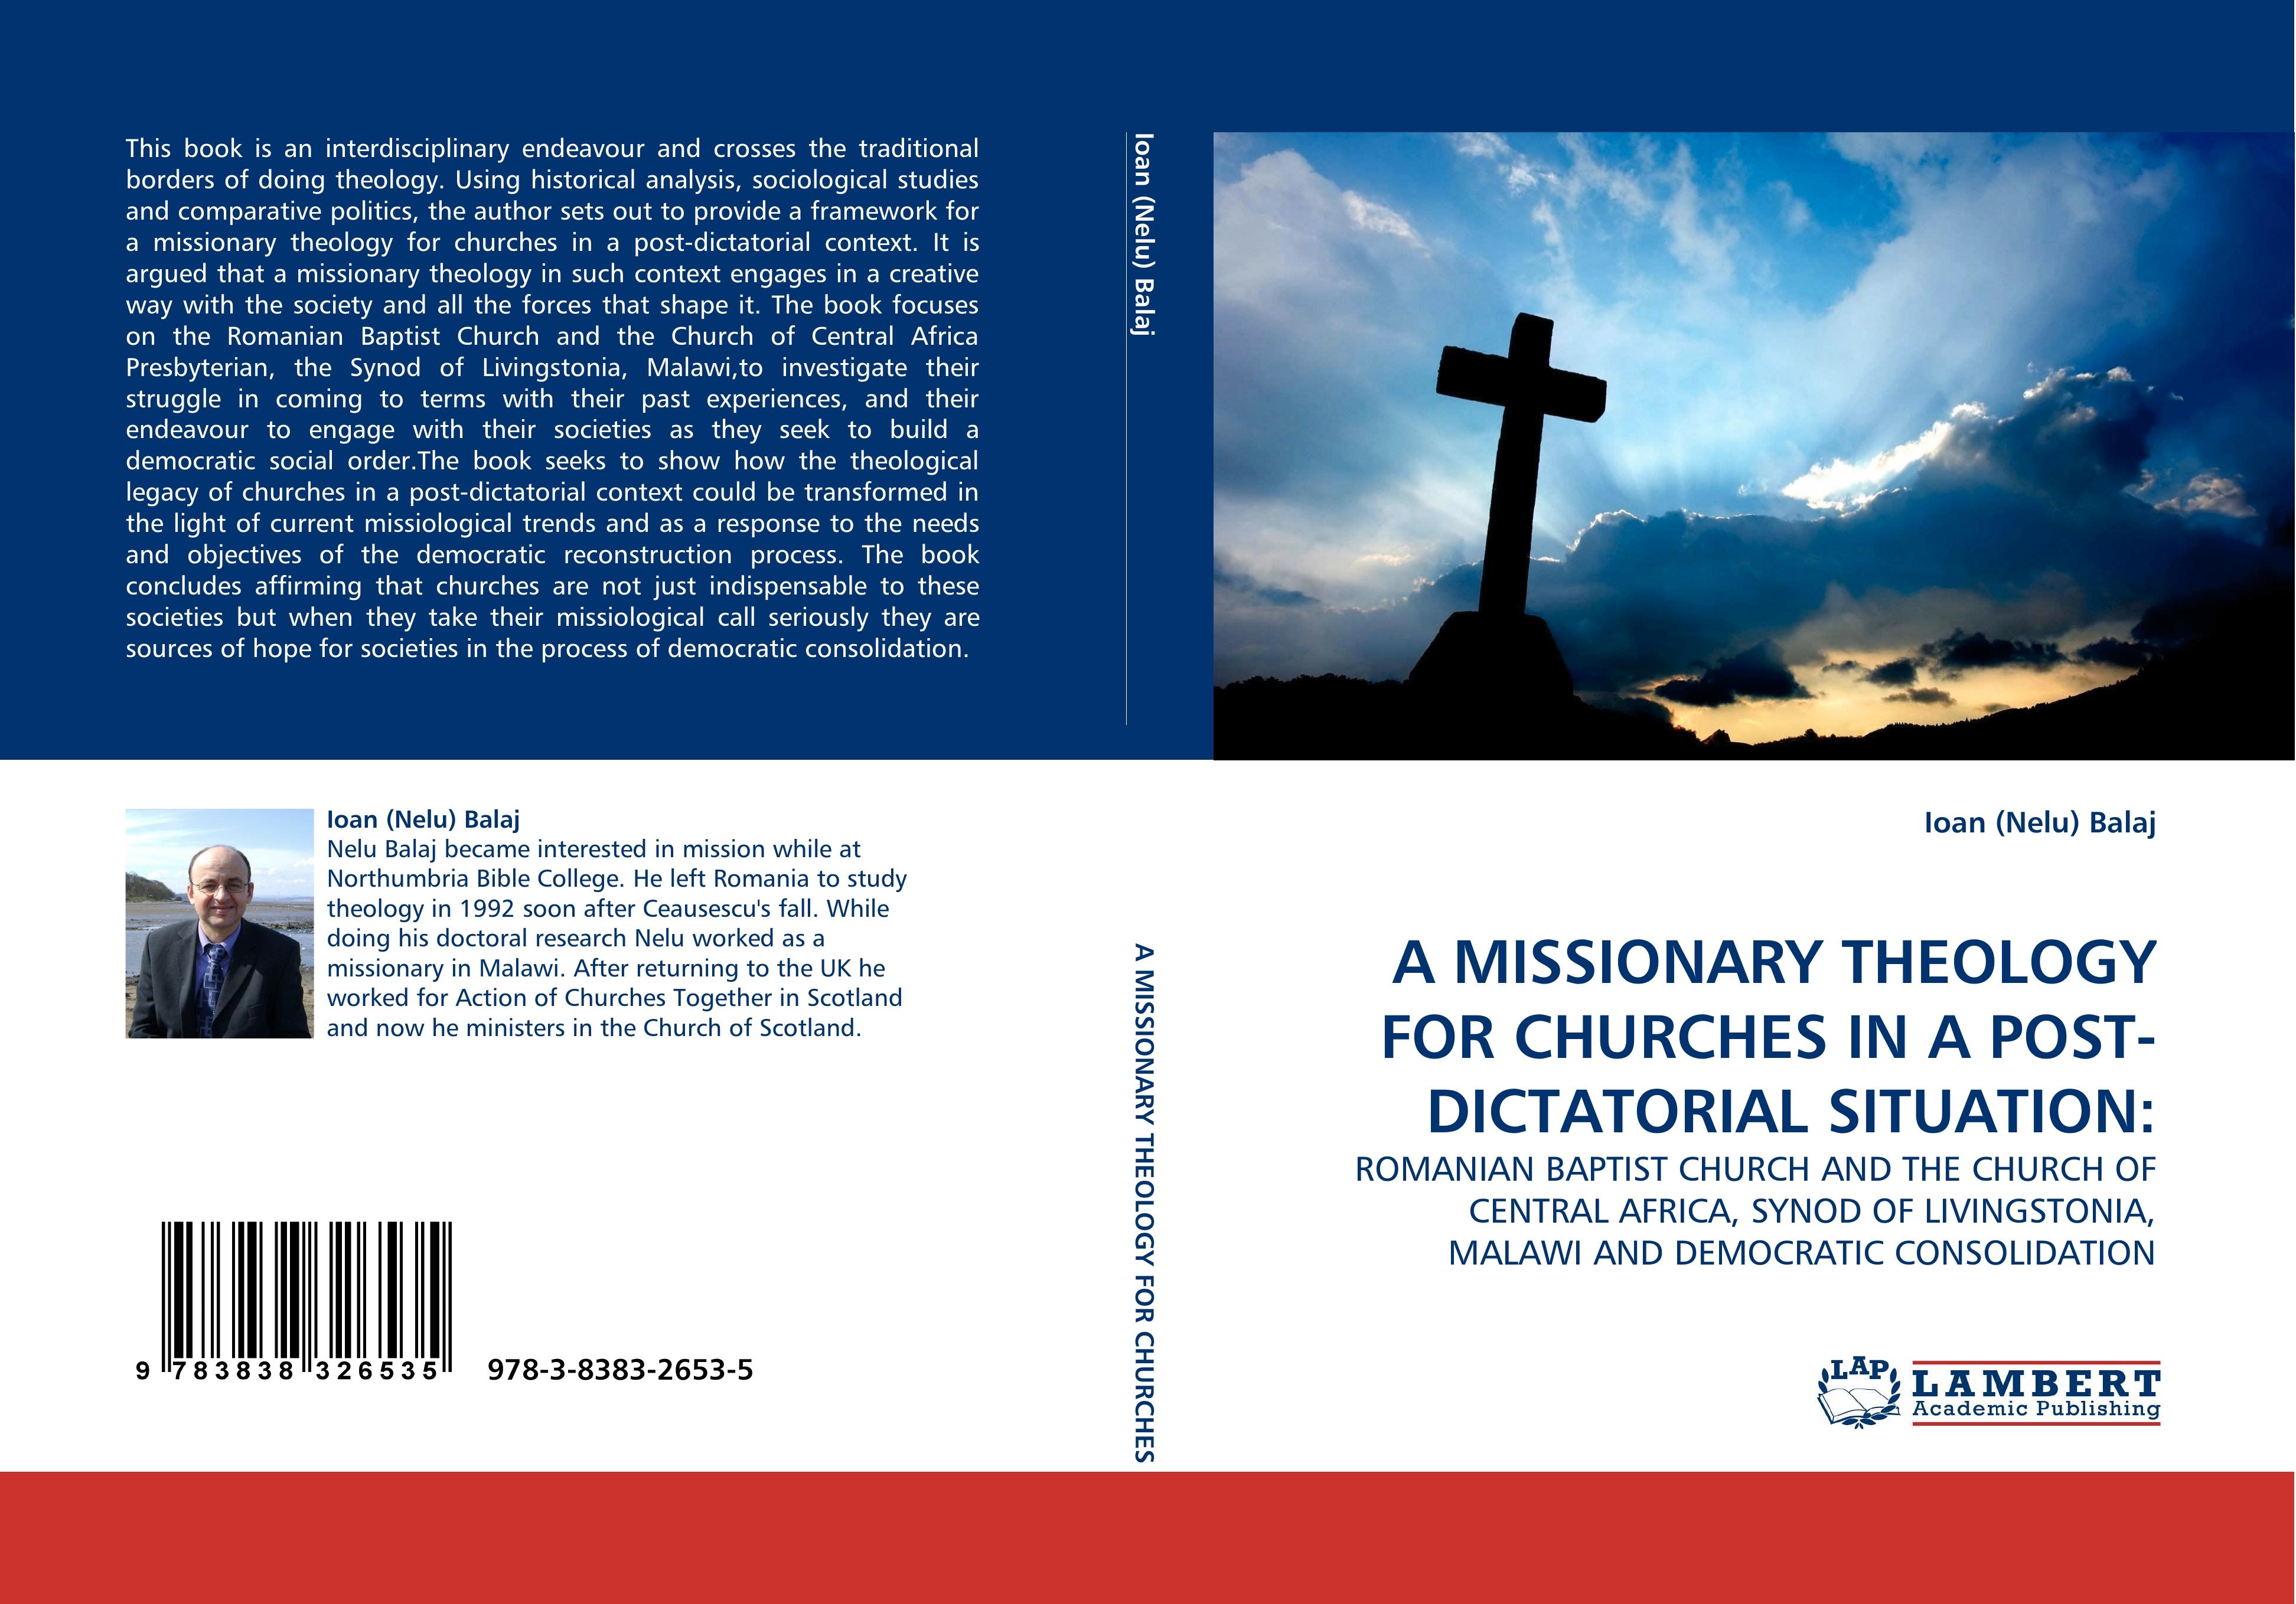 A MISSIONARY THEOLOGY FOR CHURCHES IN A POST-DICTATORIAL SITUATION: | ROMANIAN BAPTIST CHURCH AND THE CHURCH OF CENTRAL AFRICA, SYNOD OF LIVINGSTONIA, MALAWI AND DEMOCRATIC CONSOLIDATION | Ioan Balaj - Balaj, Ioan (Nelu)